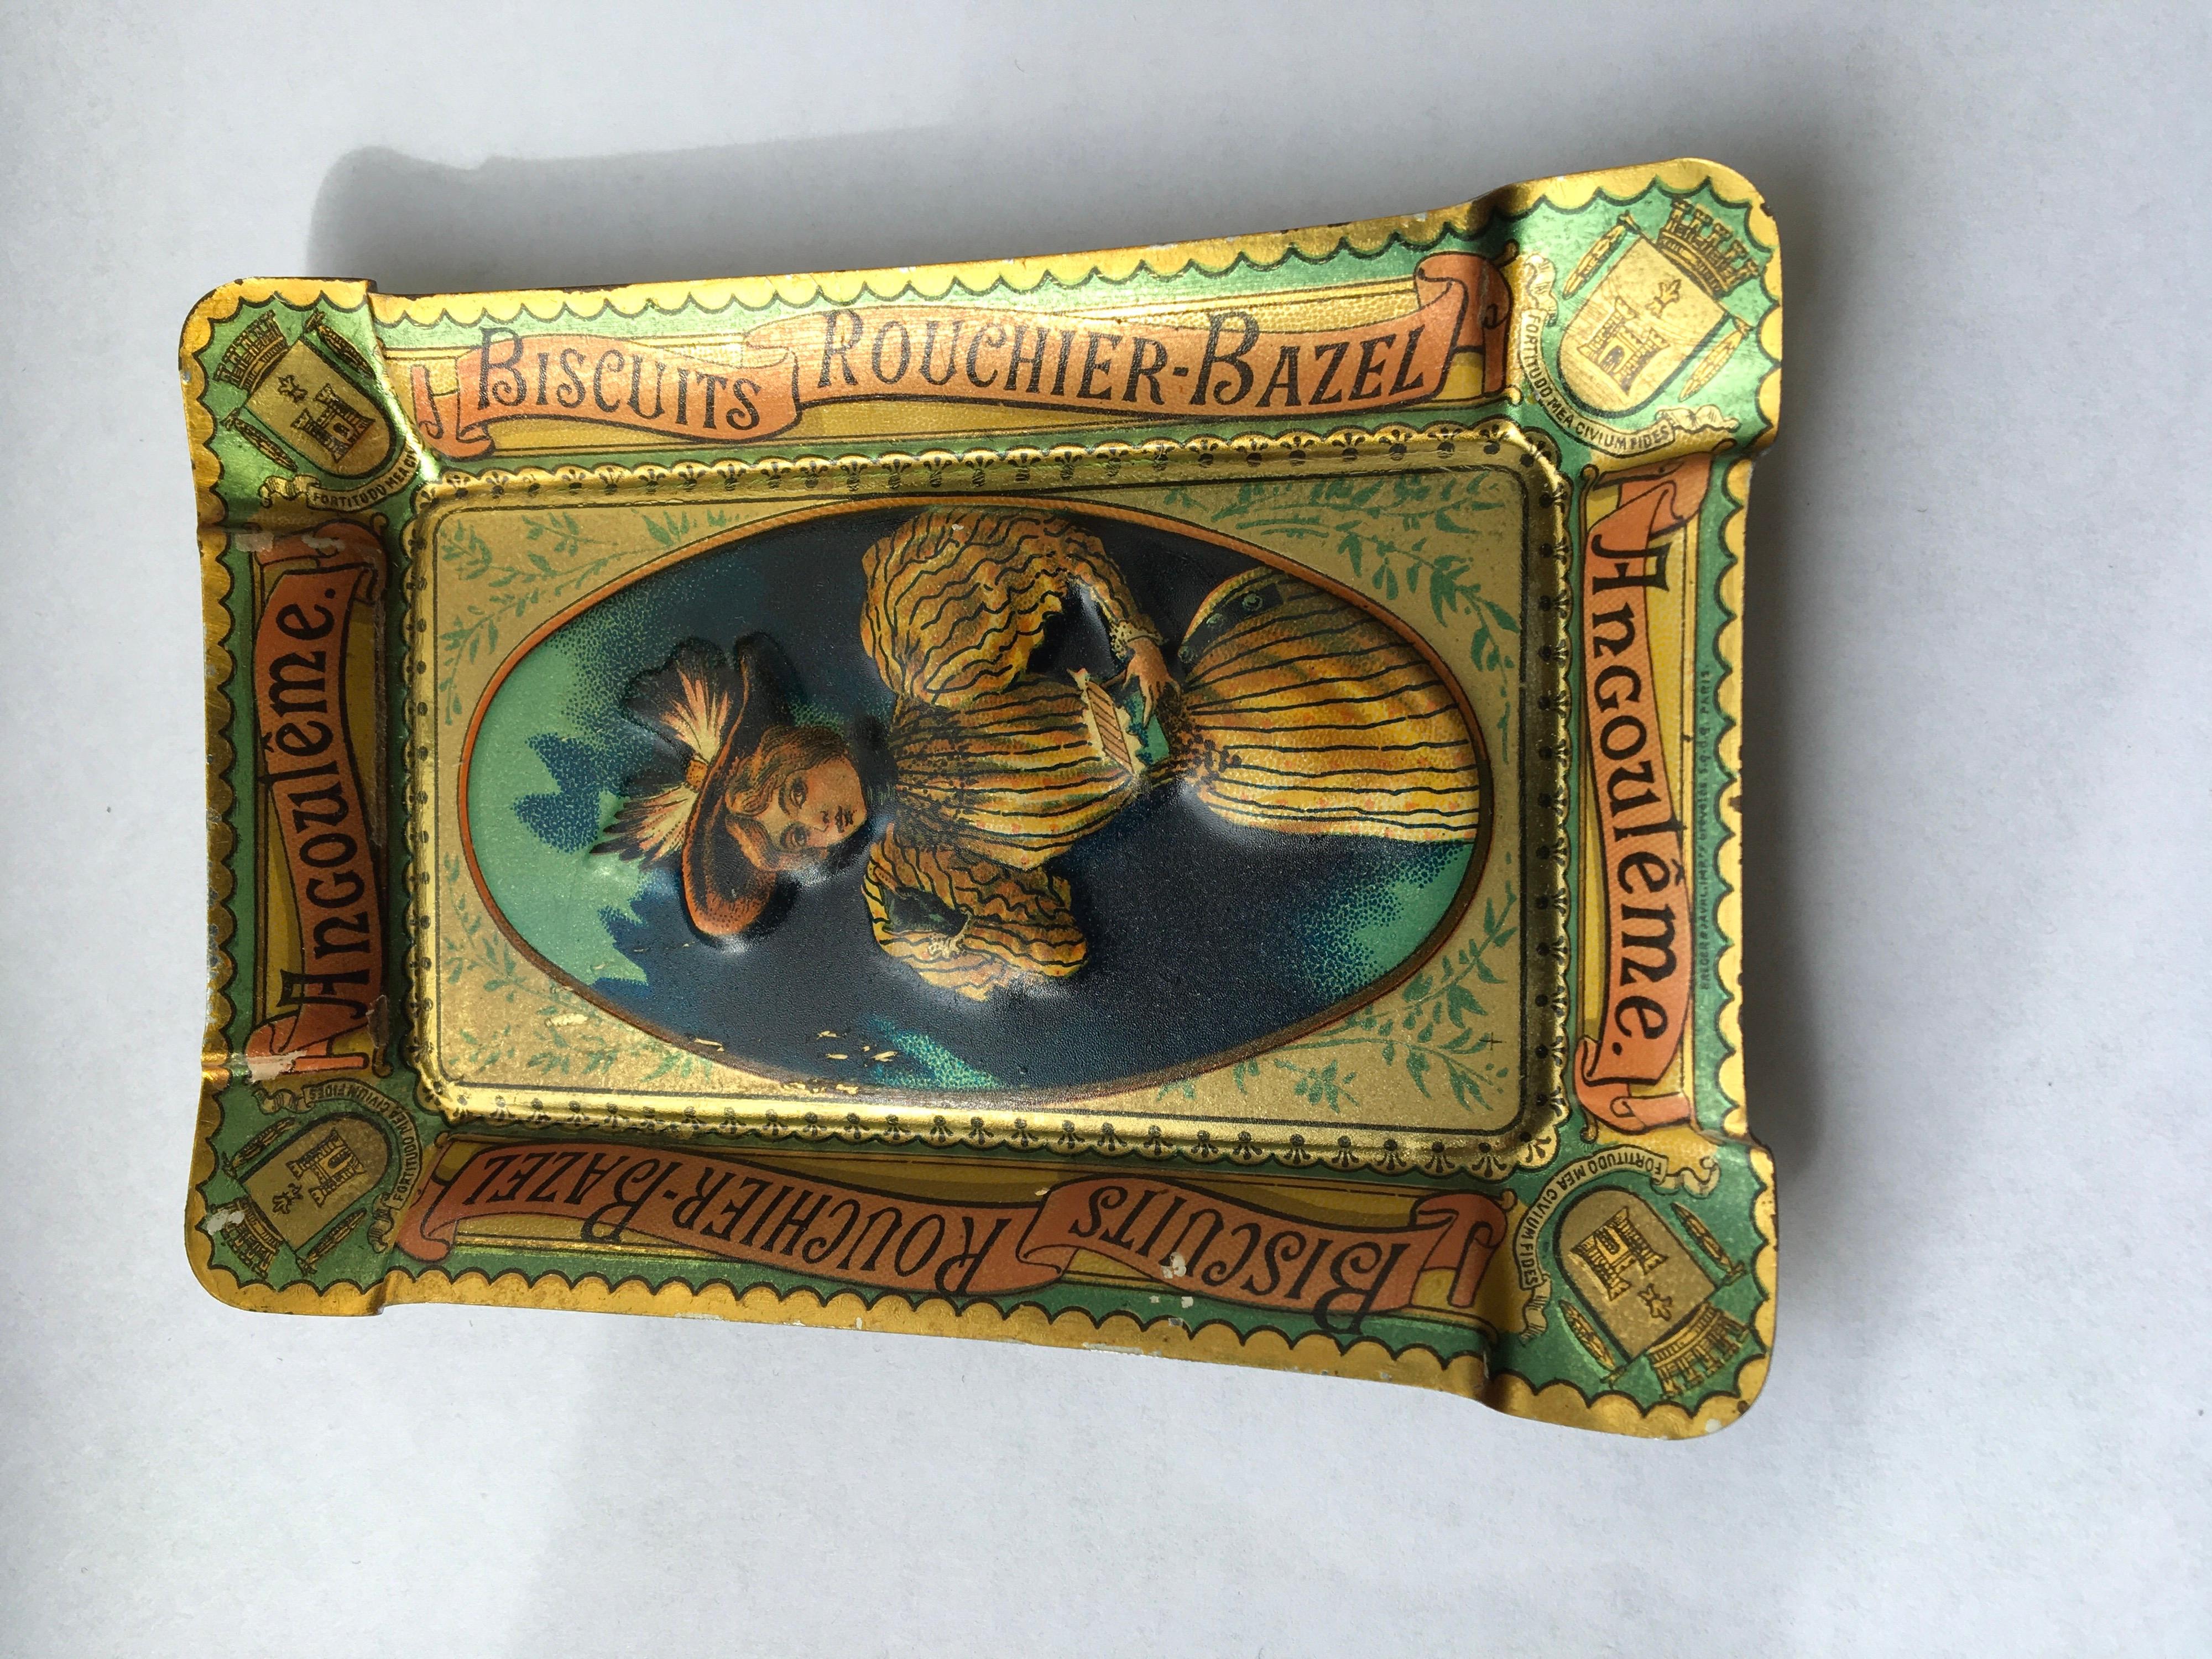 Antique Litho Tin Tray or Ashtray for Biscuits Rouchier Bazel France, circa 1900 3